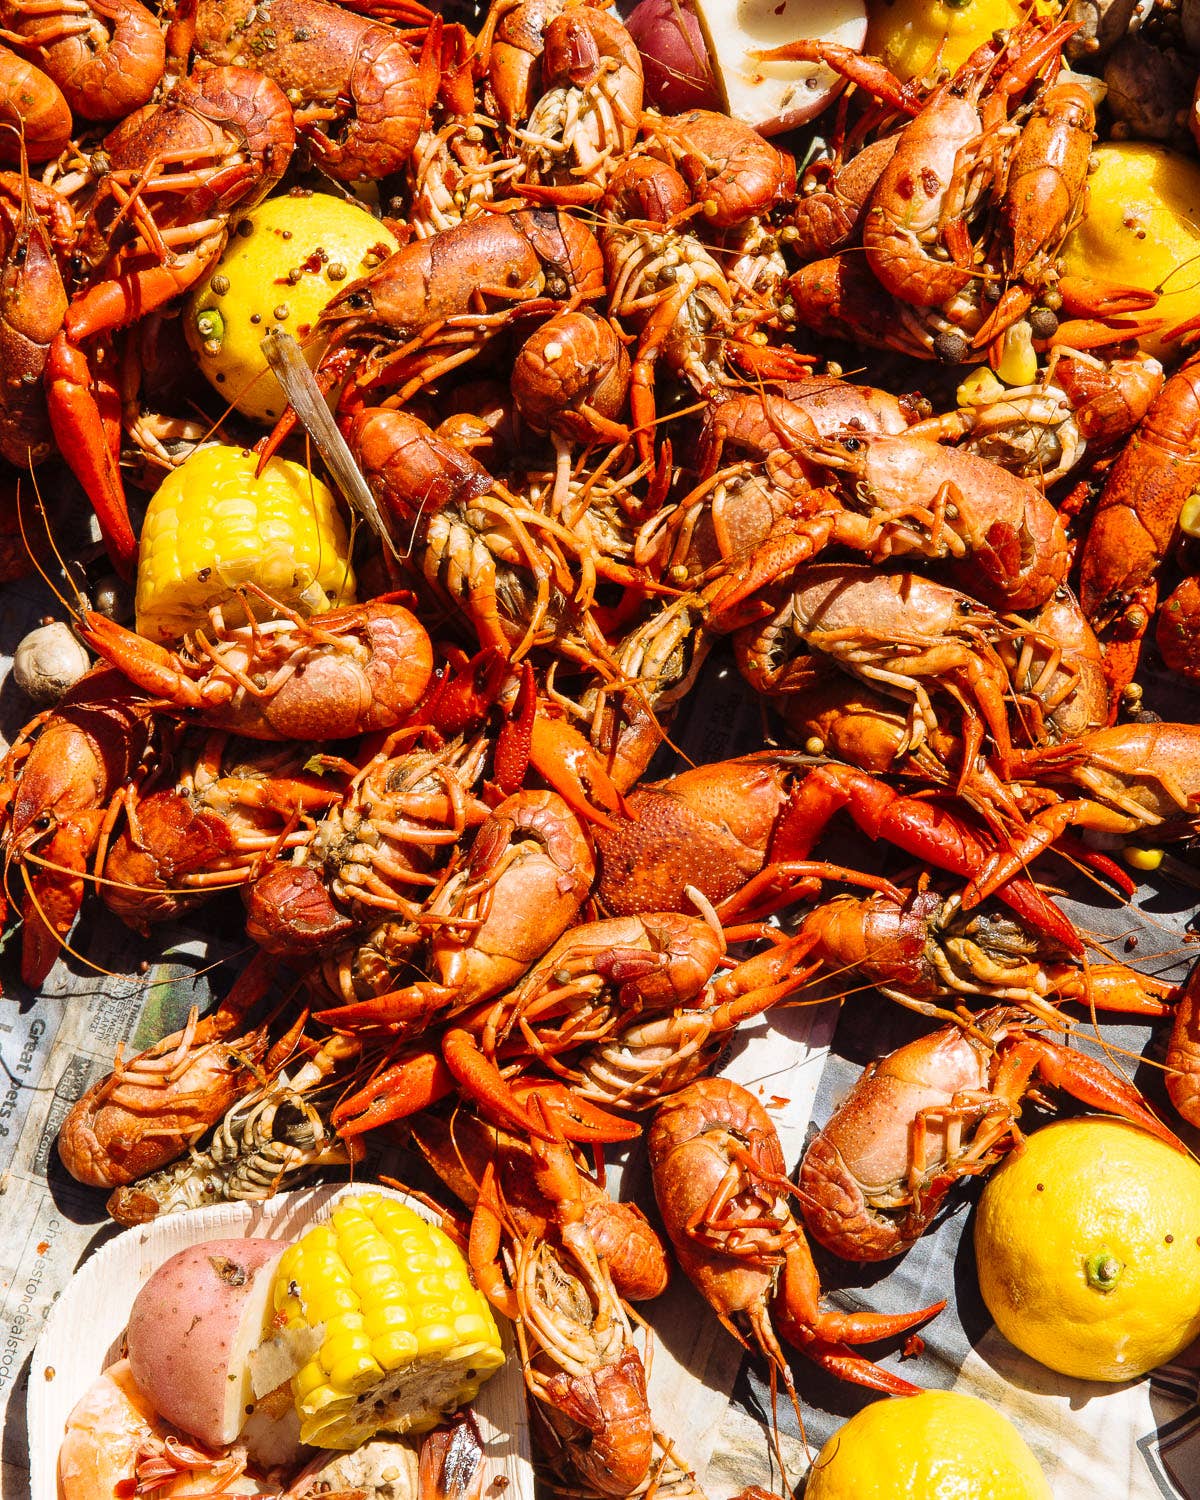 What’s Goes Into a Crawfish Boil? (Besides Crawfish, That Is)